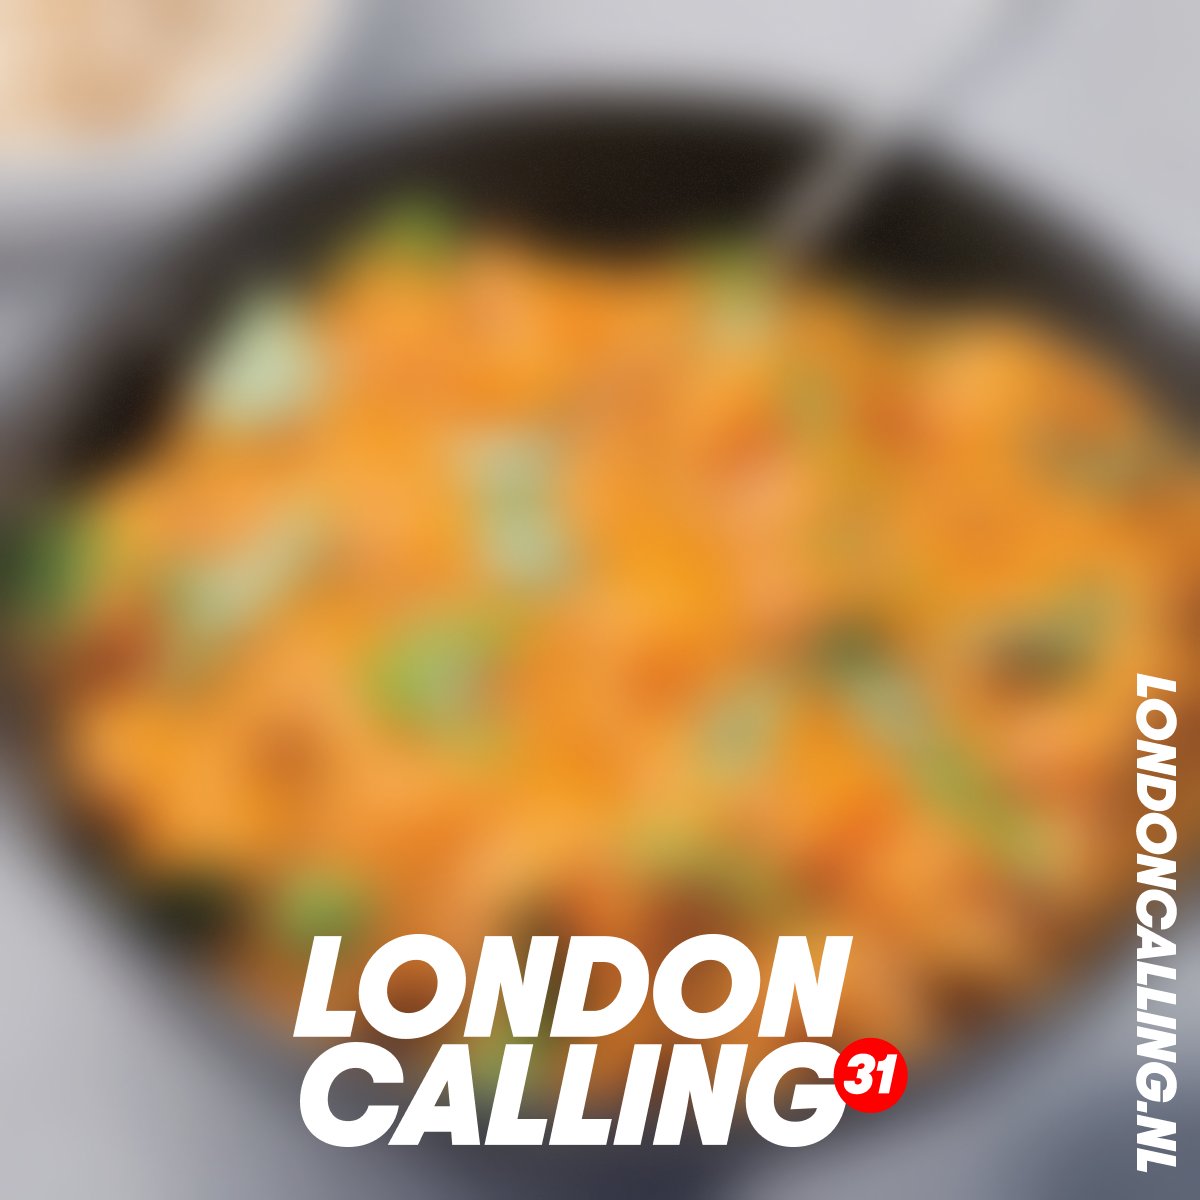 Curry is widely considered a national dish of the UK. During London Calling, get yourself a delicious pumpkin curry with naan, made with love by the talented chefs of Slikwild. Book your hearty meal in advance through the ticket button at londoncalling.nl. Bon appétit!🍴